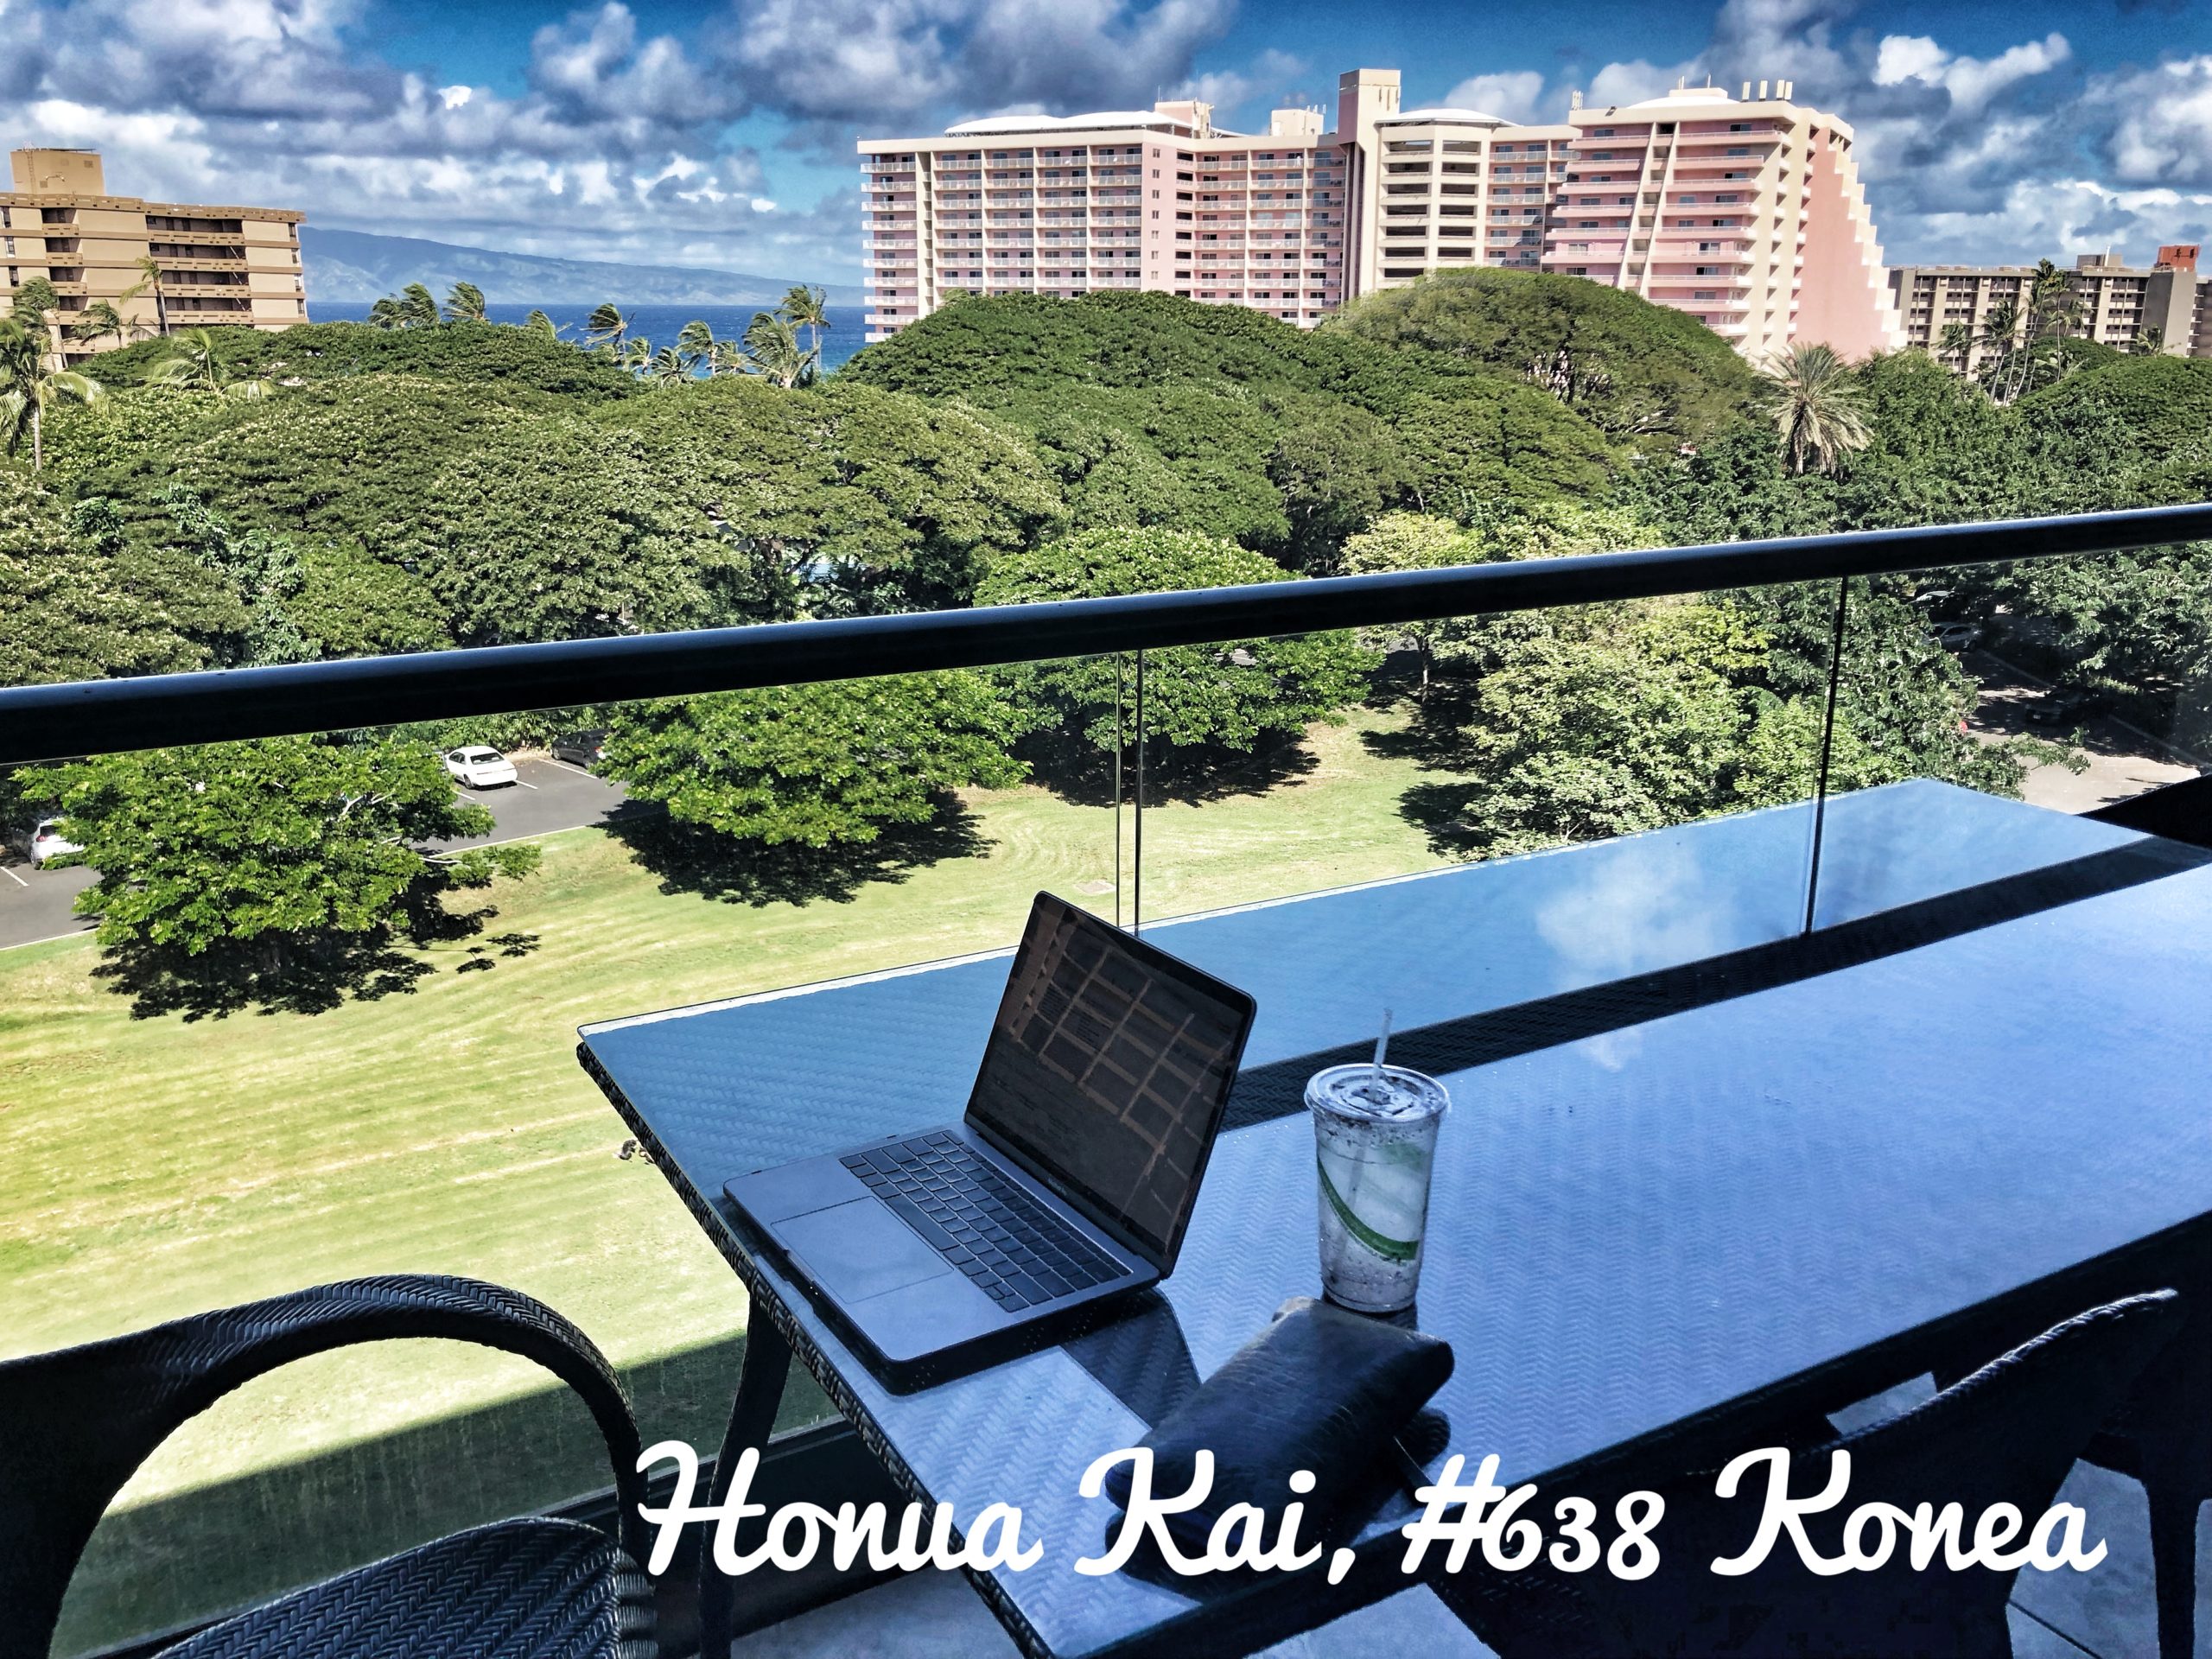 Hawaii Purchase Contract and Association Documents , Maui